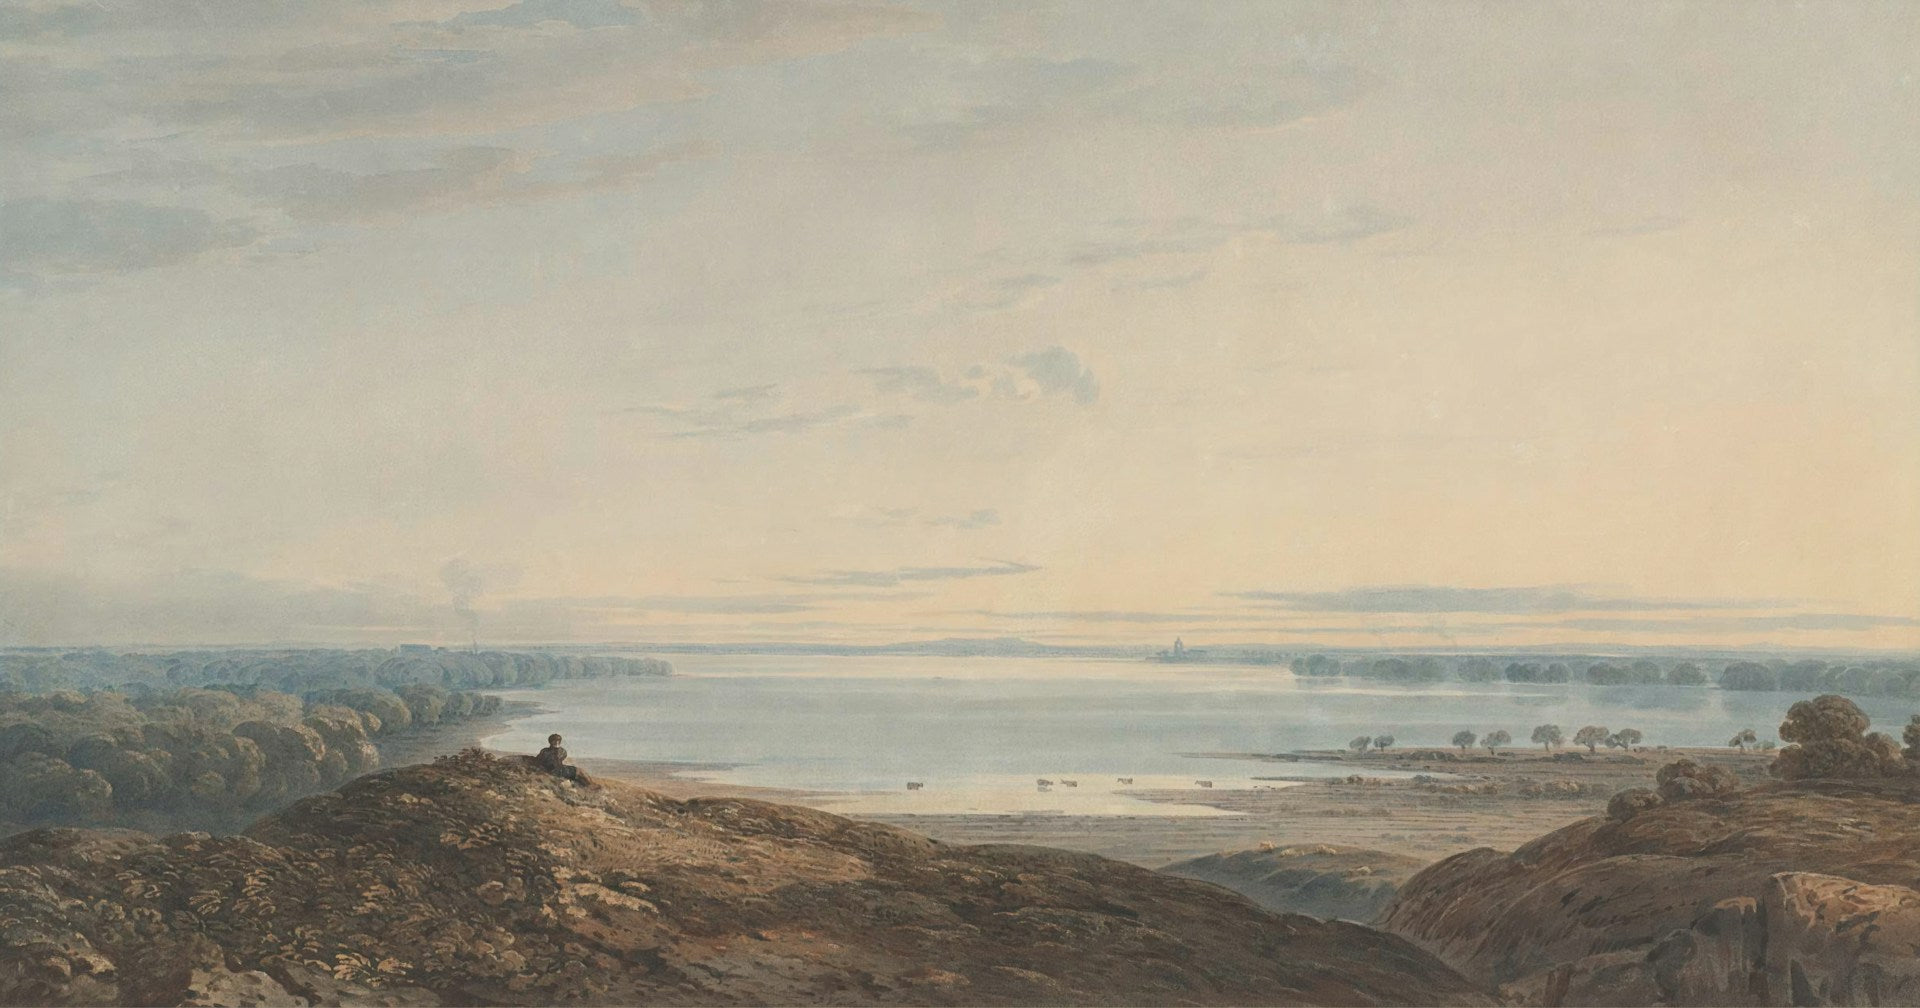 A painting of a landscape.